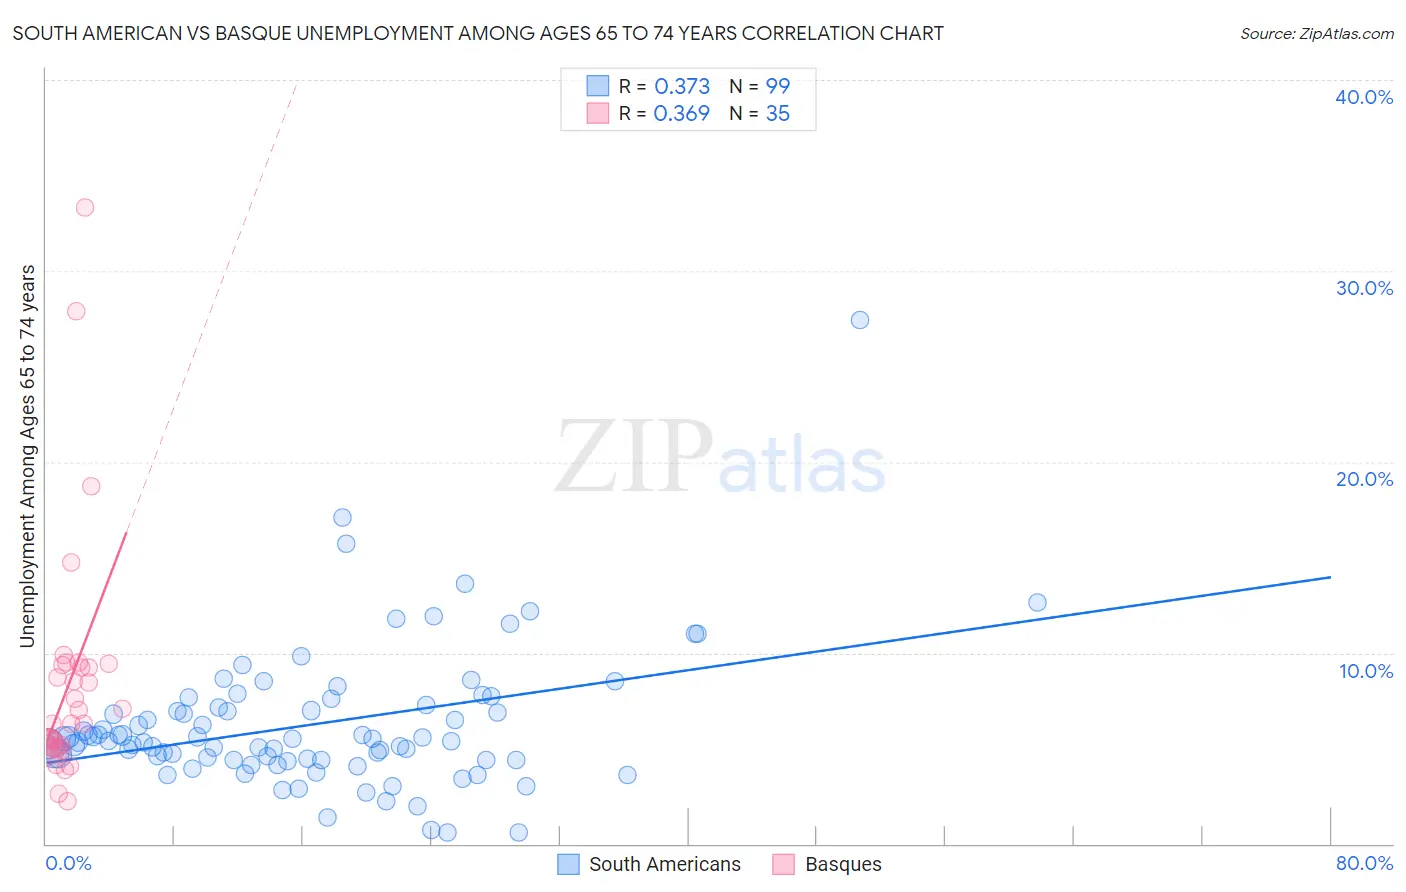 South American vs Basque Unemployment Among Ages 65 to 74 years